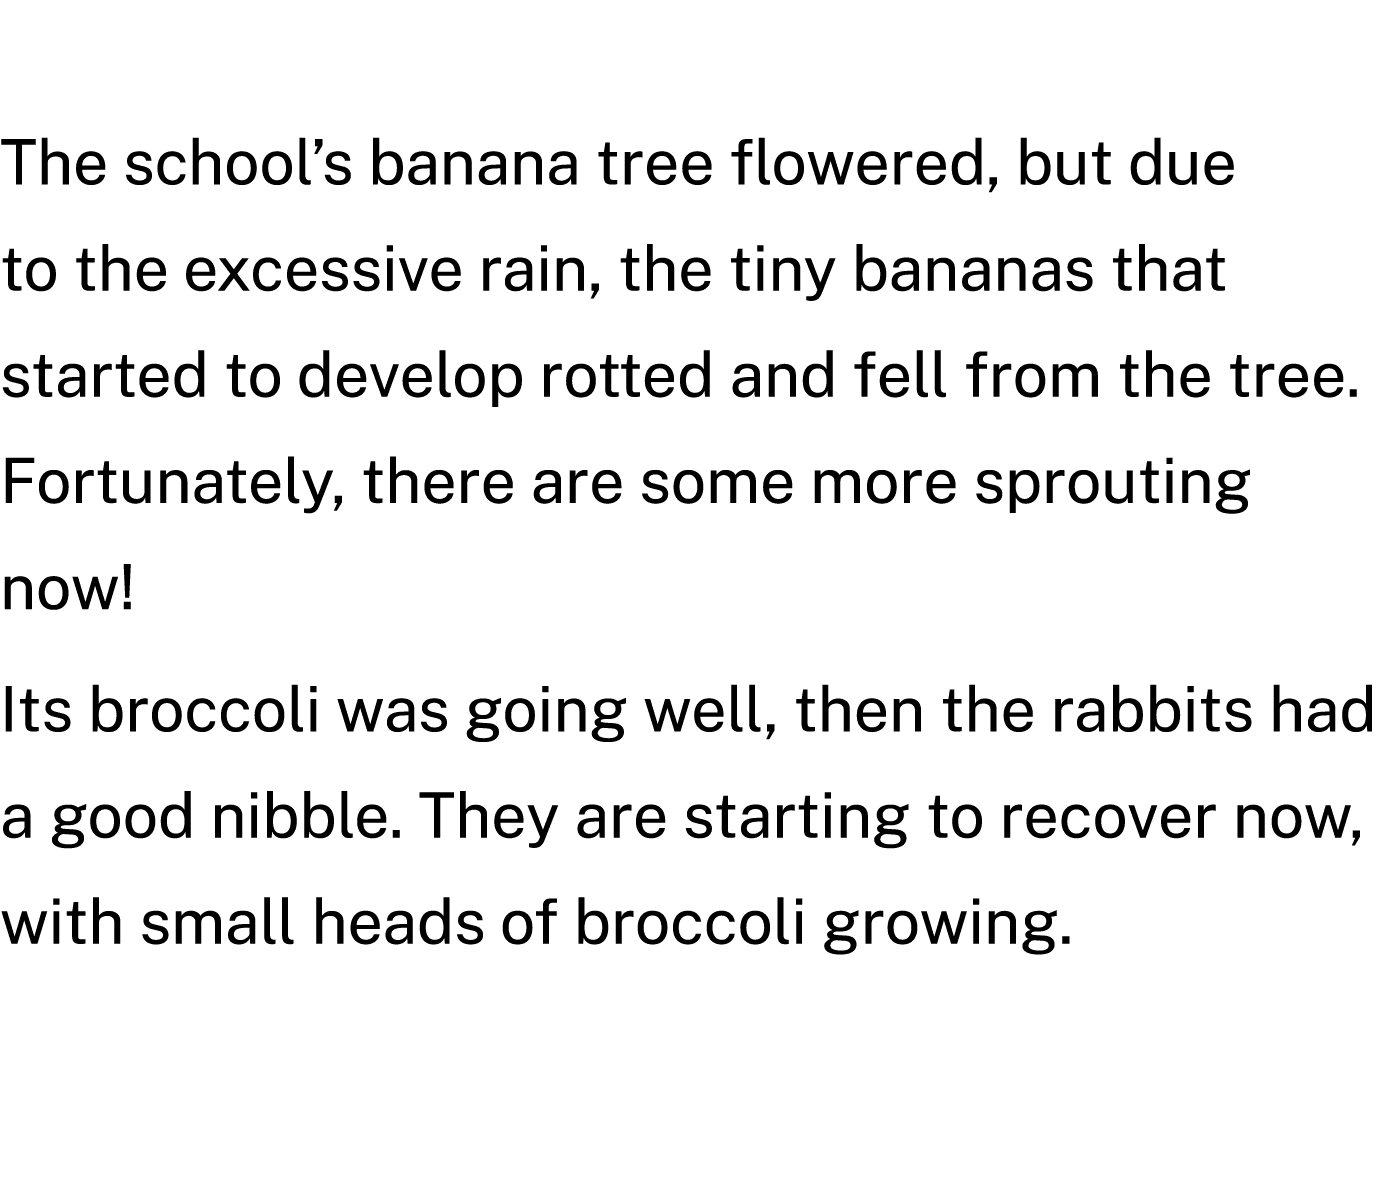 The school’s banana tree flowered, but due to the excessive rain, the tiny bananas that started to develop rotted and...